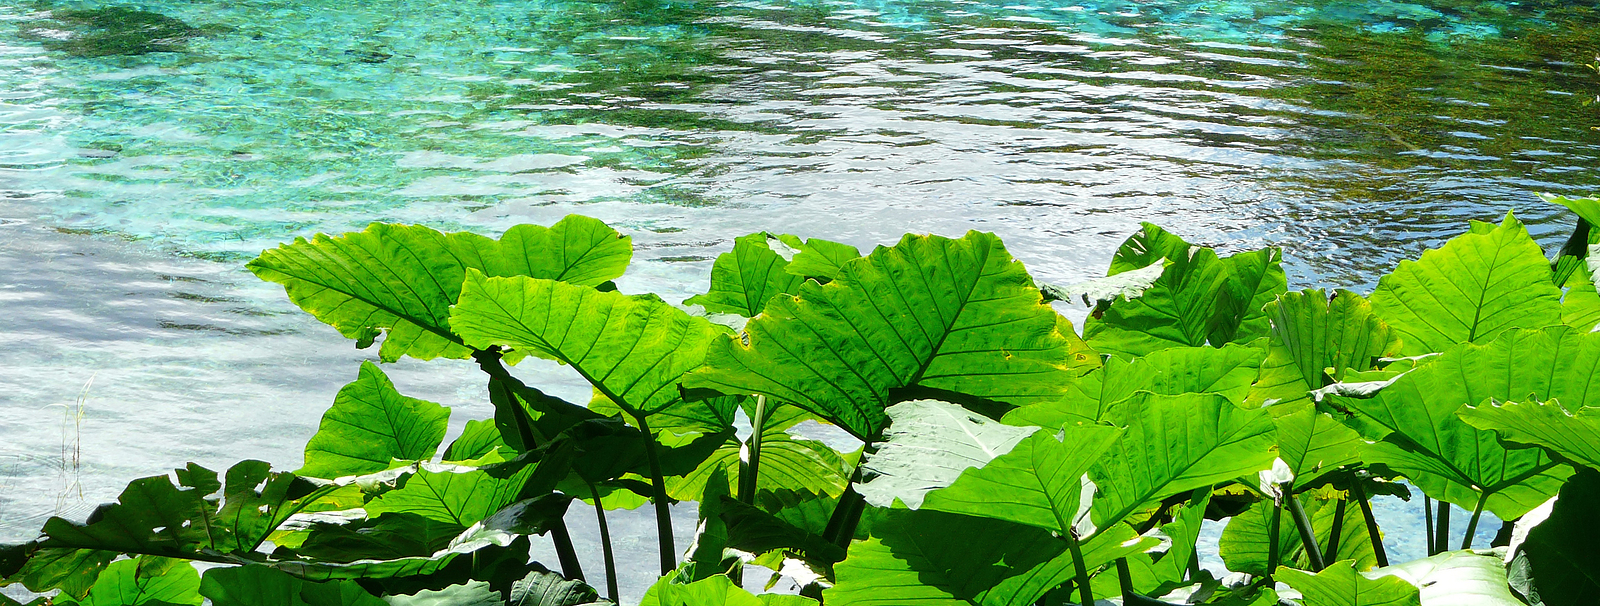 Elephant Ear plants, also known as Colocasia and Taro, at Rainbow Springs State Park, the source of the Rainbow River in central Florida.